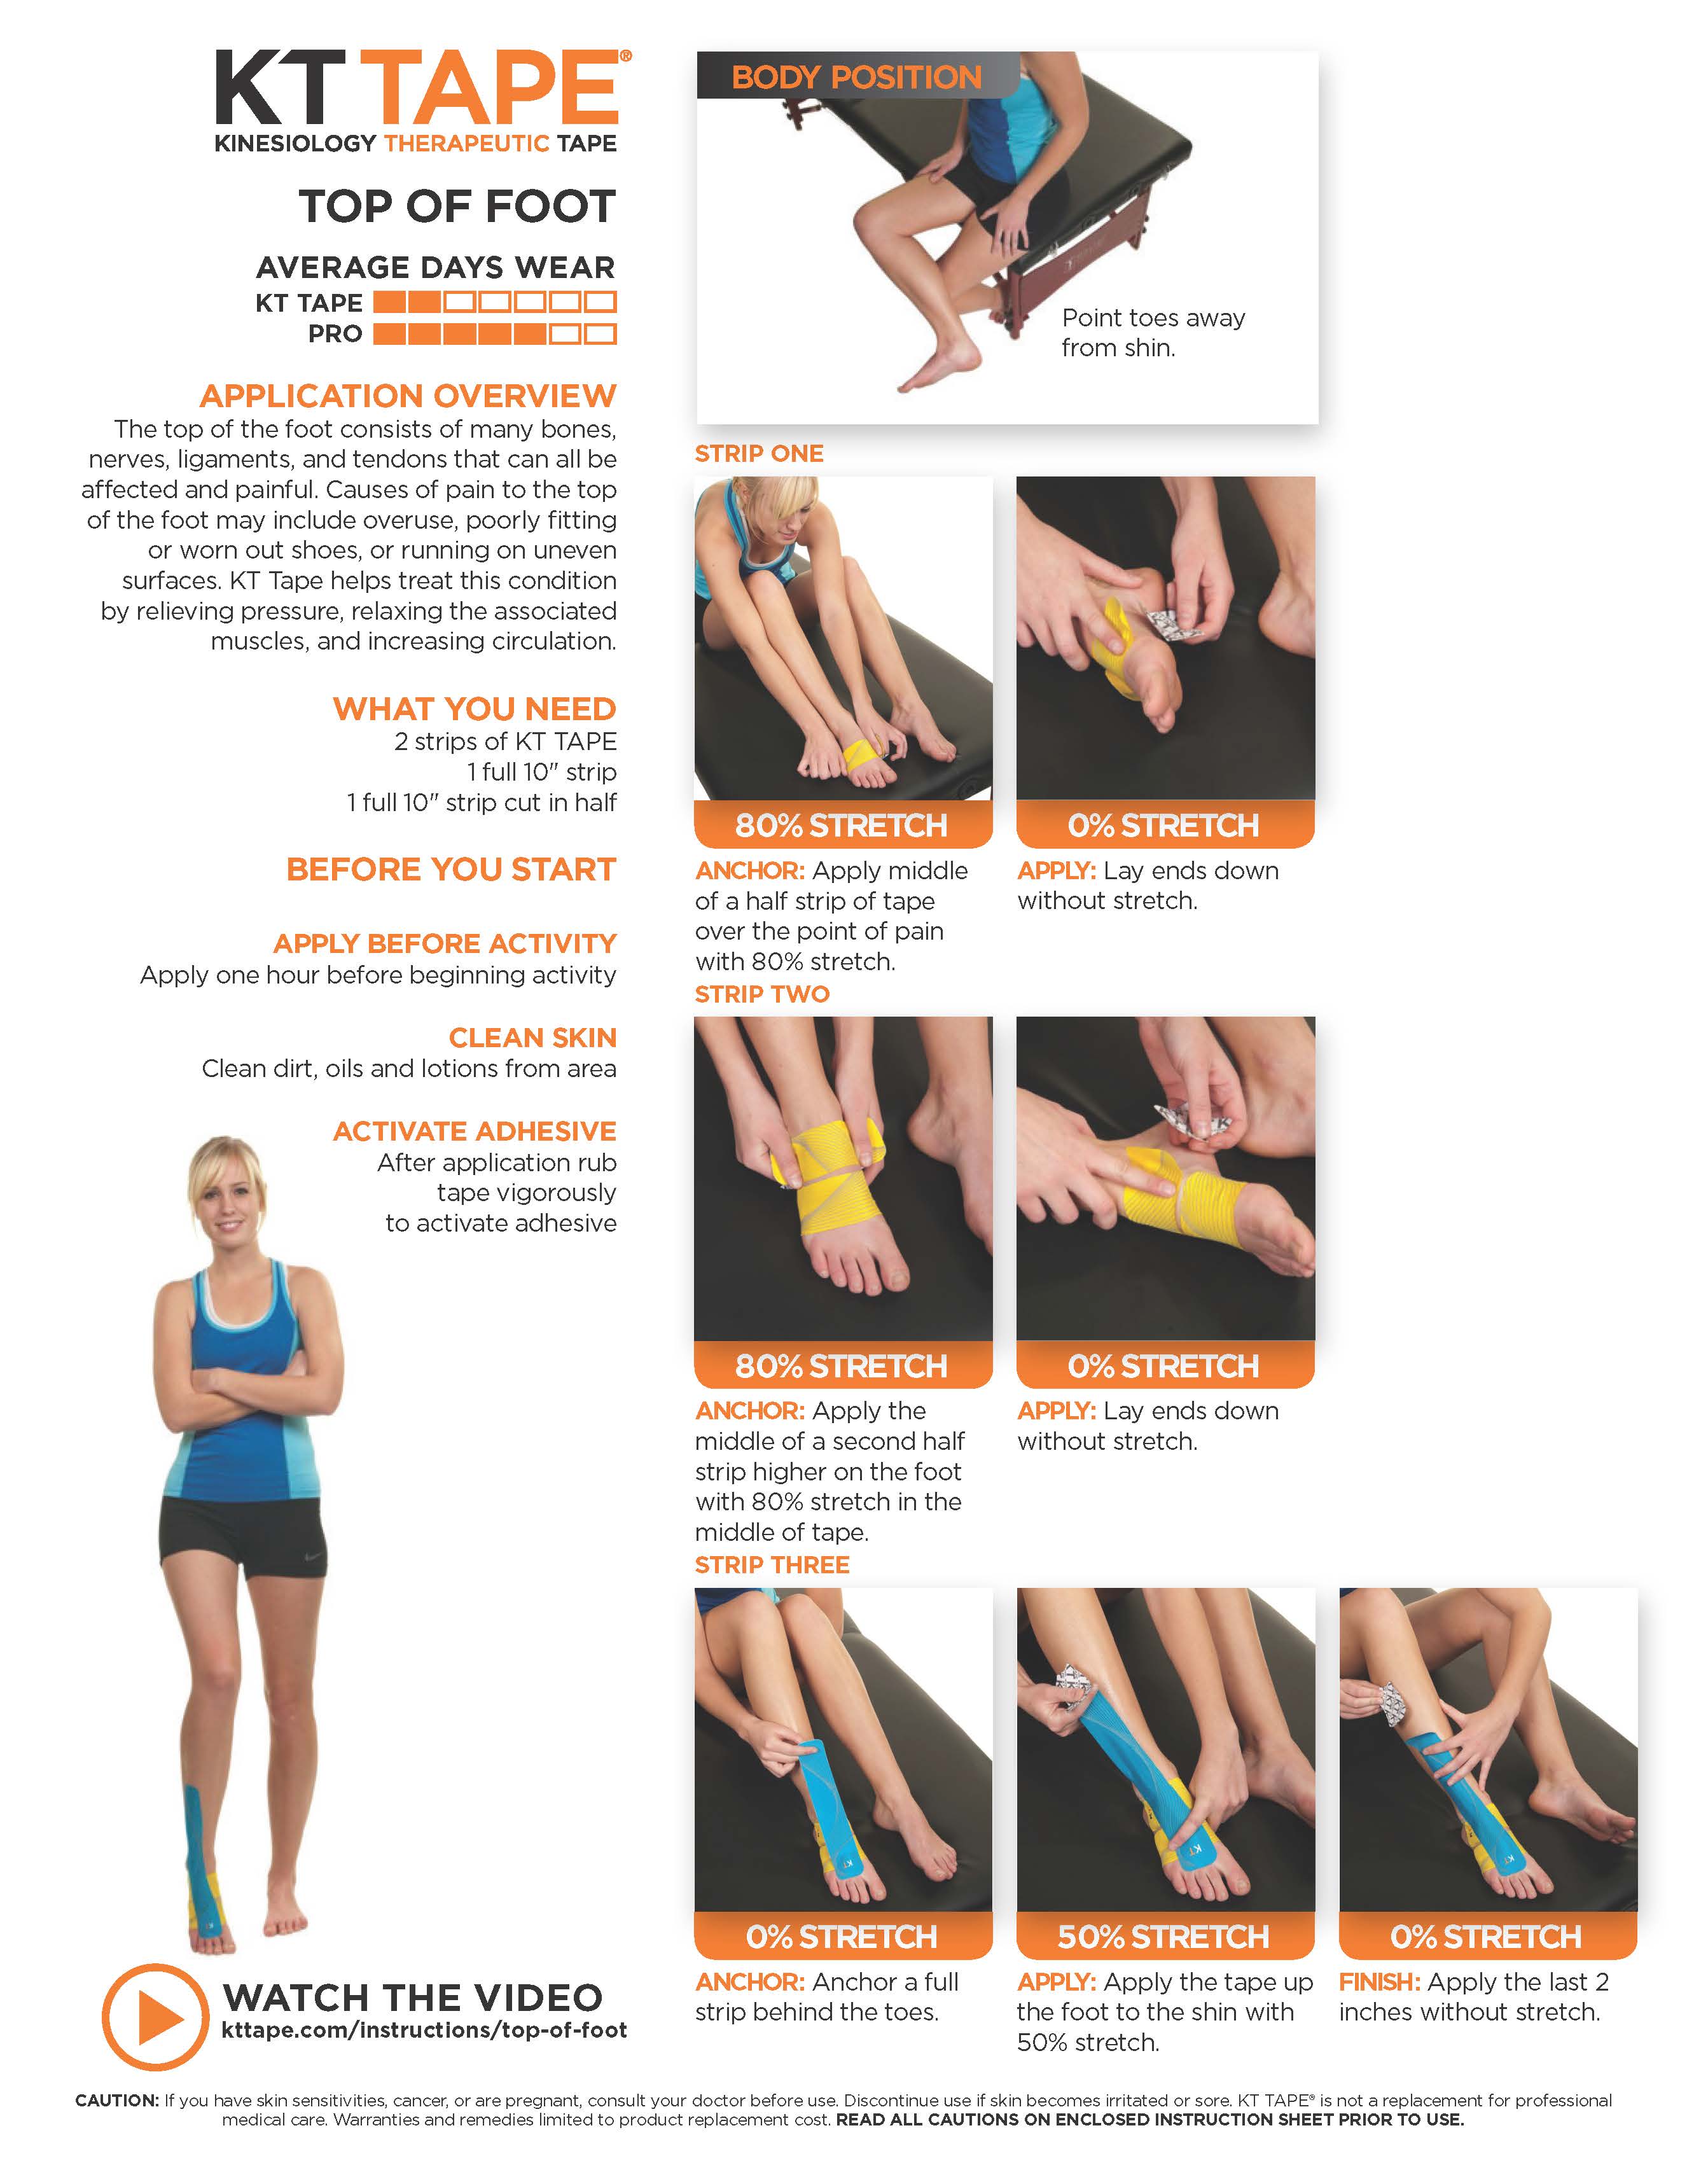 How To Put Kt Tape For Shin Splints